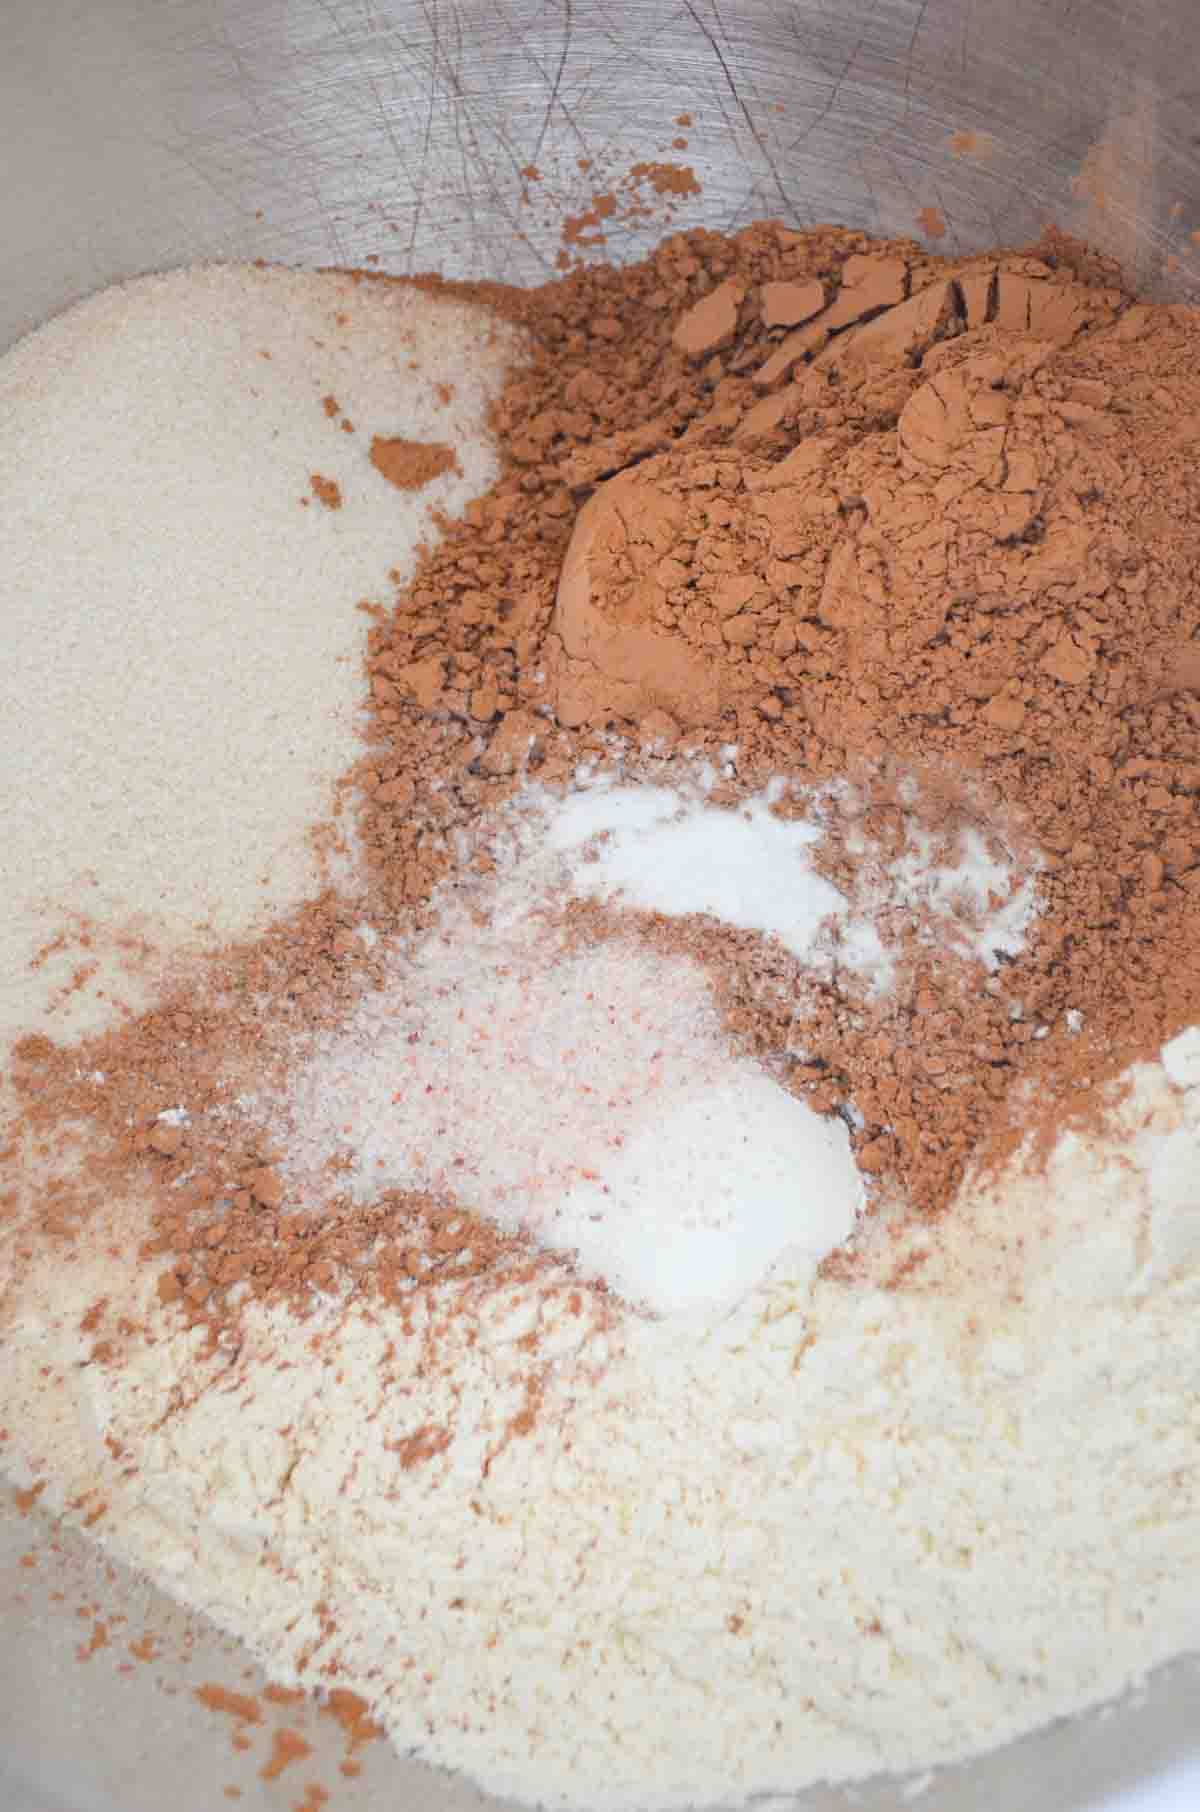 A down shot of flour, sugar, cocoa powder, baking soda, baking powder, and salt in a stainless steel mixing bowl.